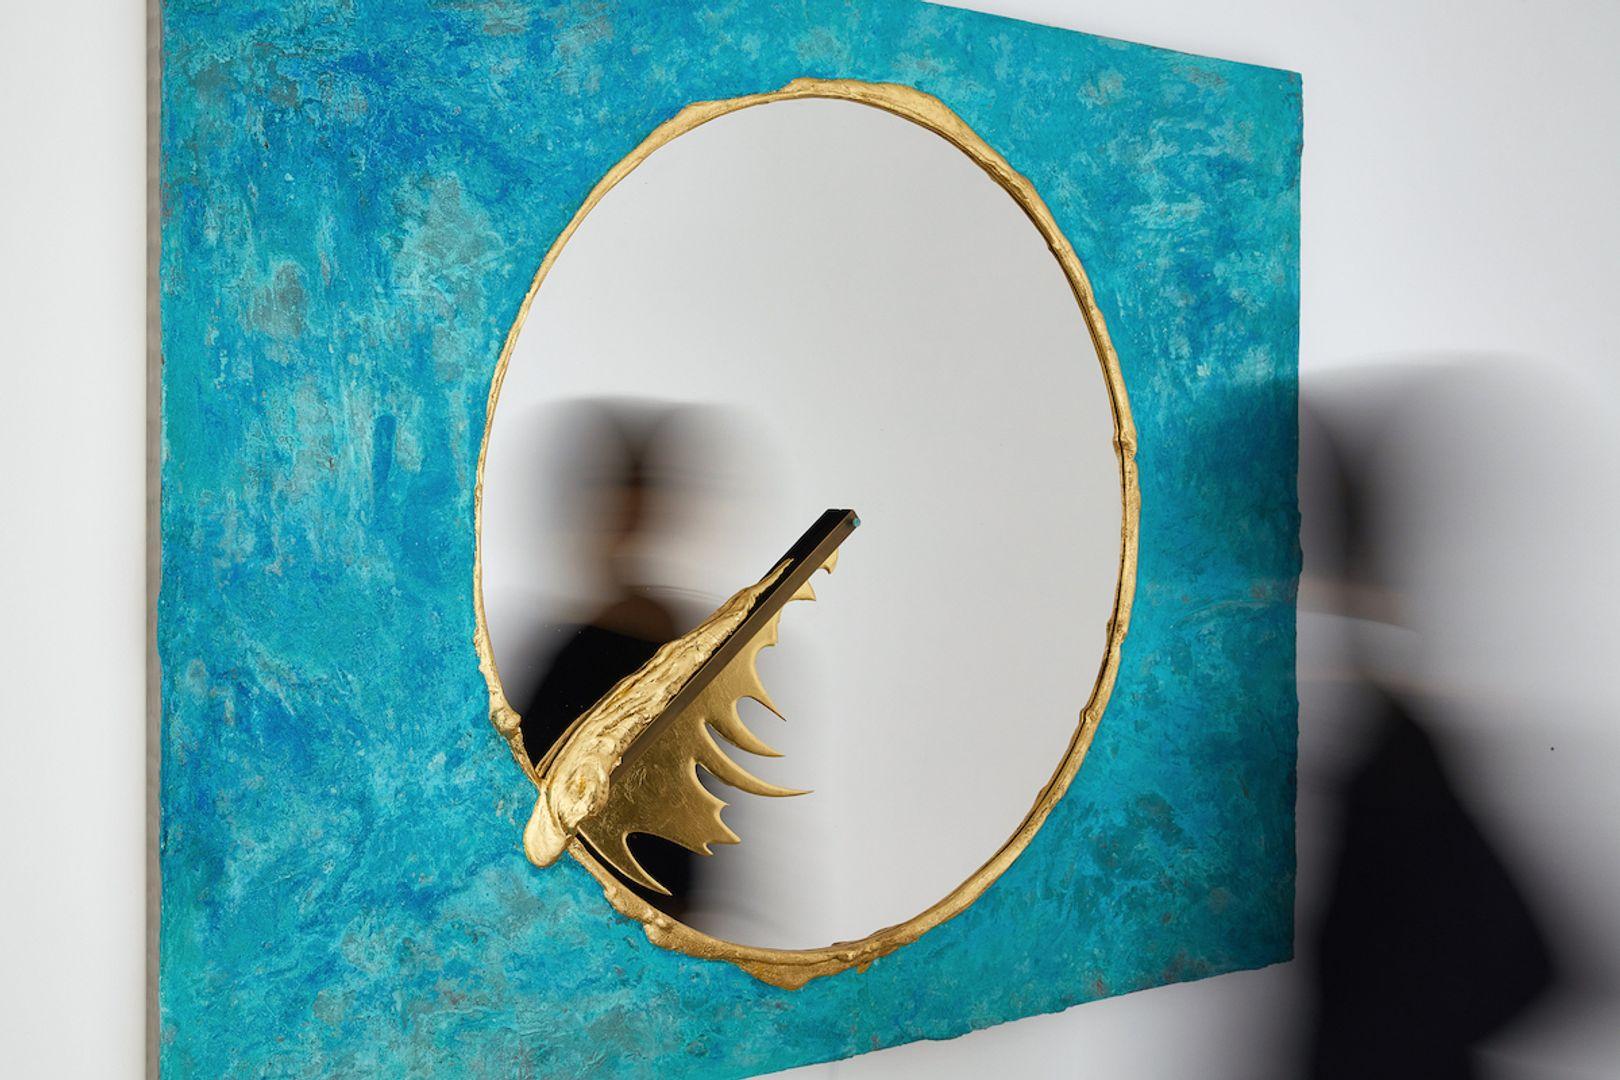 Chinese Daishi Luo, 'Poetry of Time', Copper, Stainless Steel Mirror For Sale